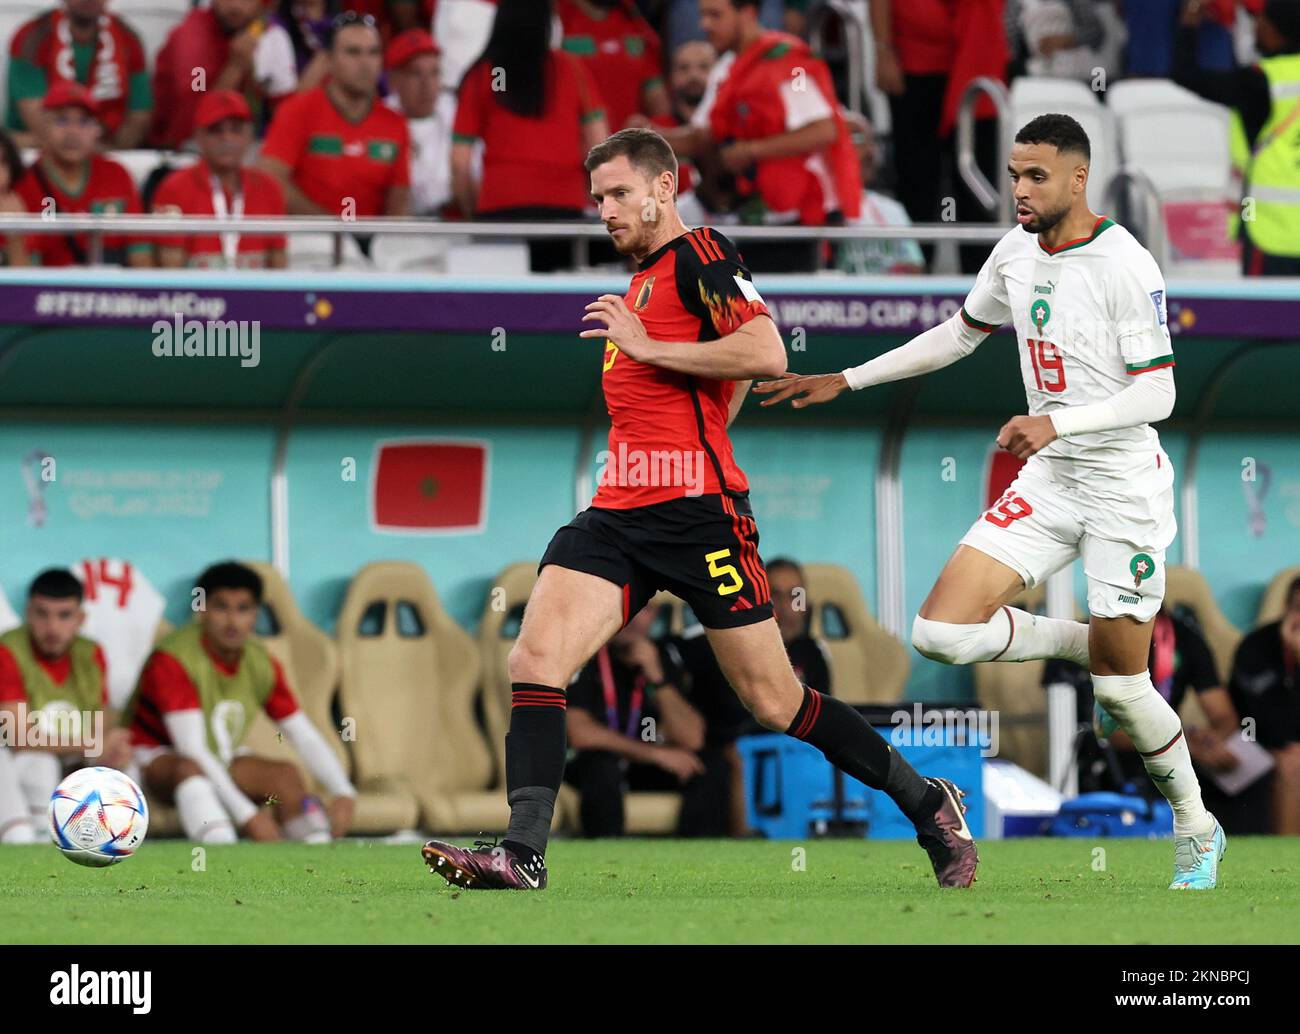 Belgium's Jan Vertonghen and Moroccan Youssef En-Nesyri pictured in action during a soccer game between Belgium's national team the Red Devils and Morocco, in Group F of the FIFA 2022 World Cup in Al Thumama Stadium, Doha, State of Qatar on Sunday 27 November 2022. BELGA PHOTO BRUNO FAHY Stock Photo